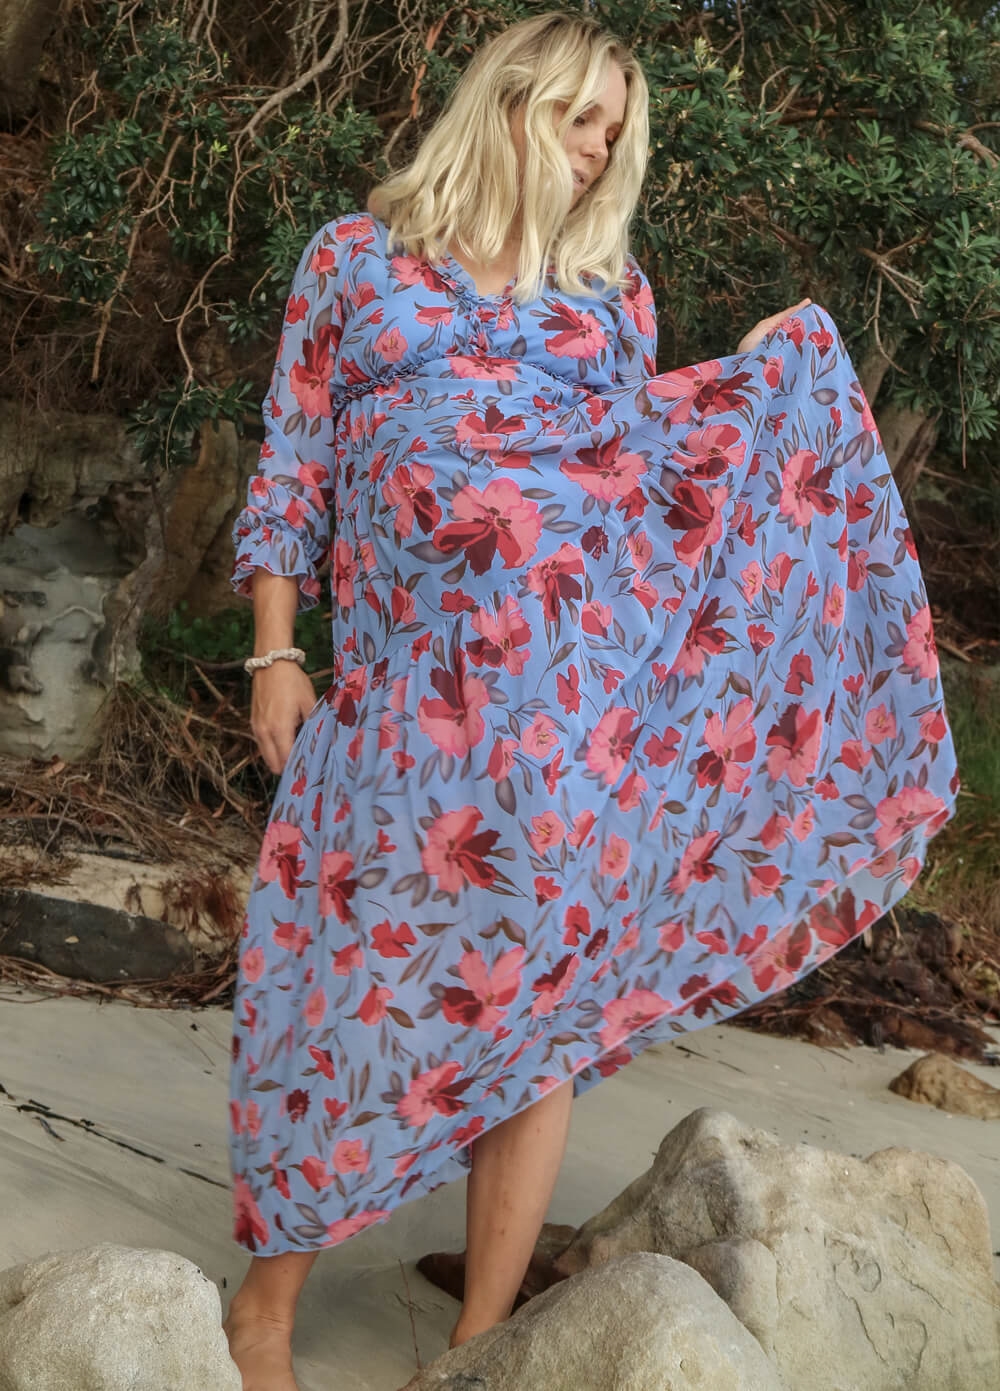 Lait & Co - Wanderlust Tiered Maxi Gown in Blue/Red Floral